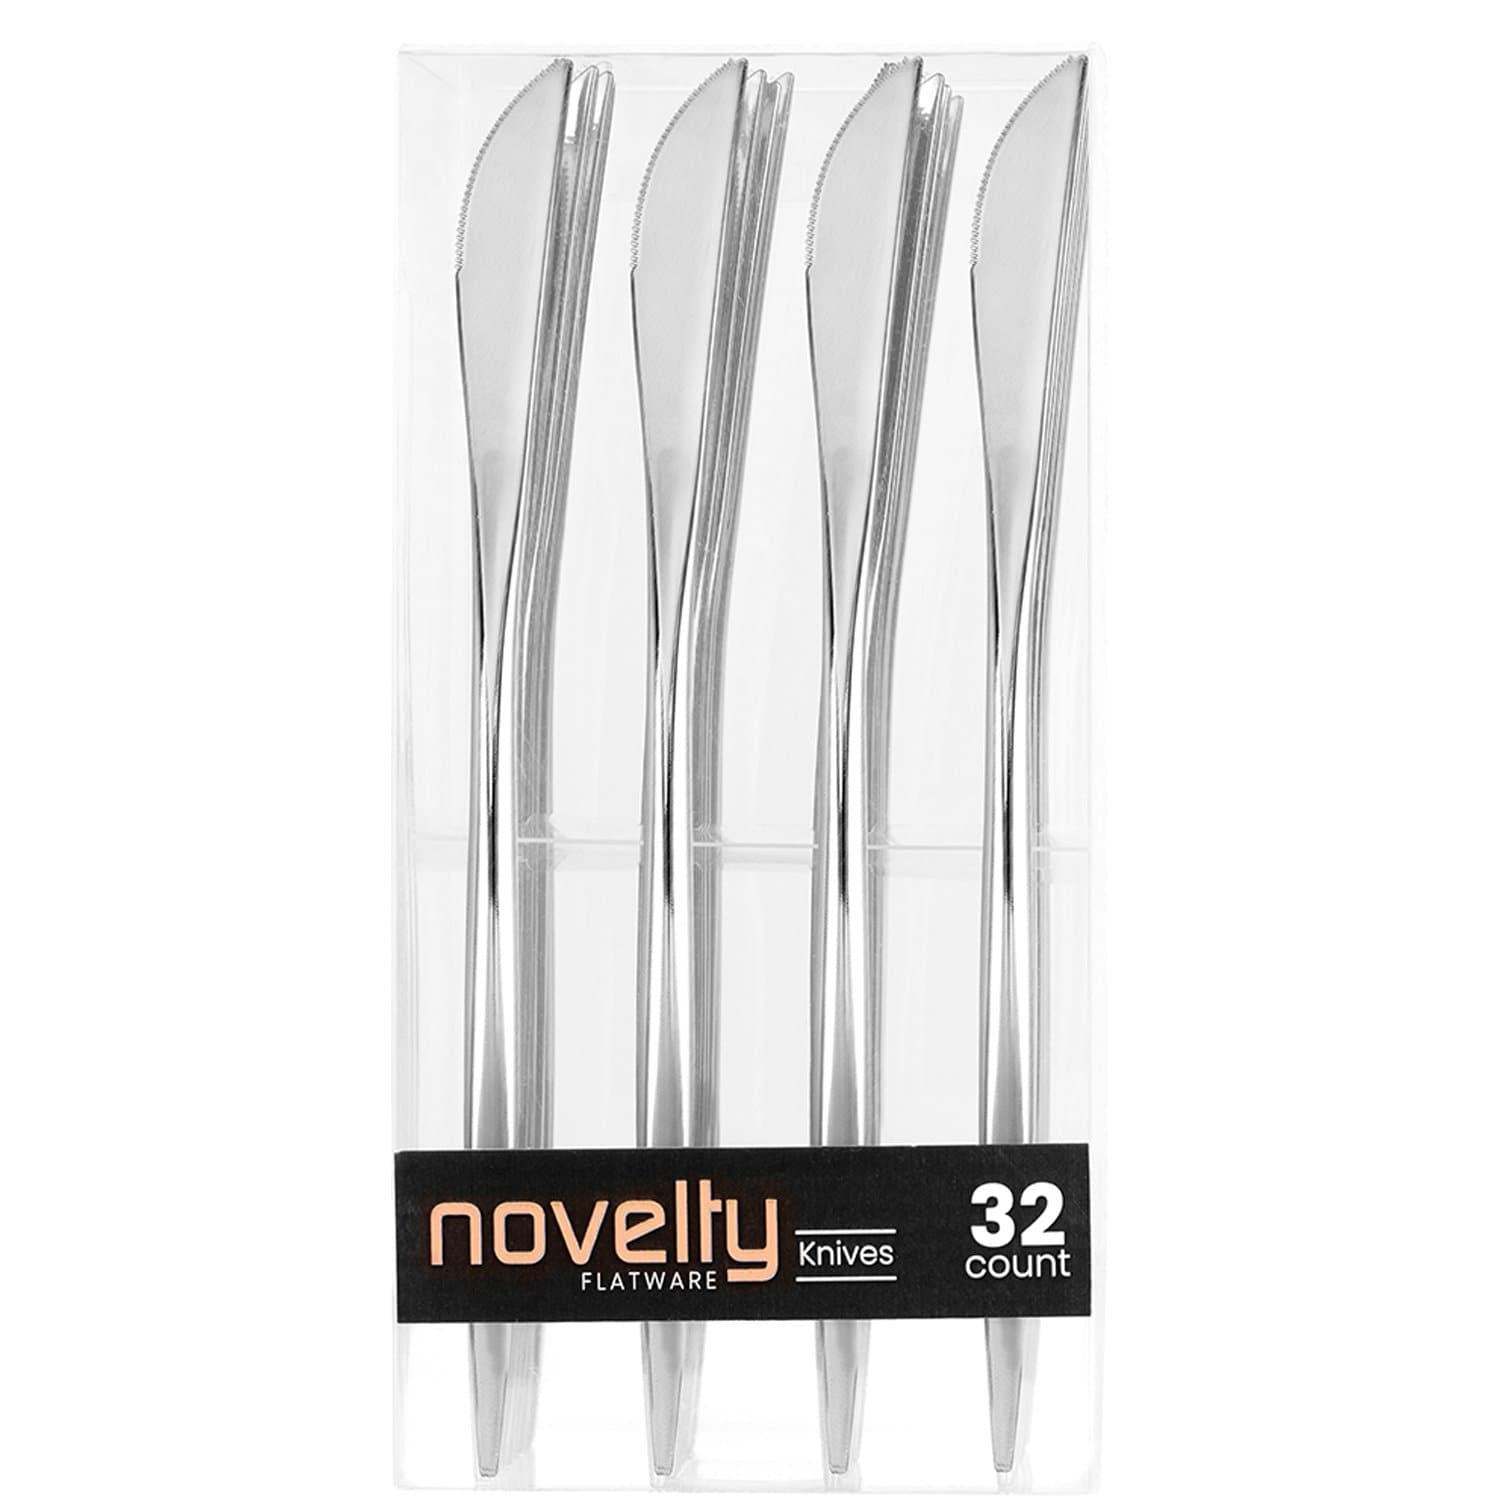 NOVELTY FLATWARE DINNER KNIVES SILVER Tablesettings Blue Sky 32 Pieces  